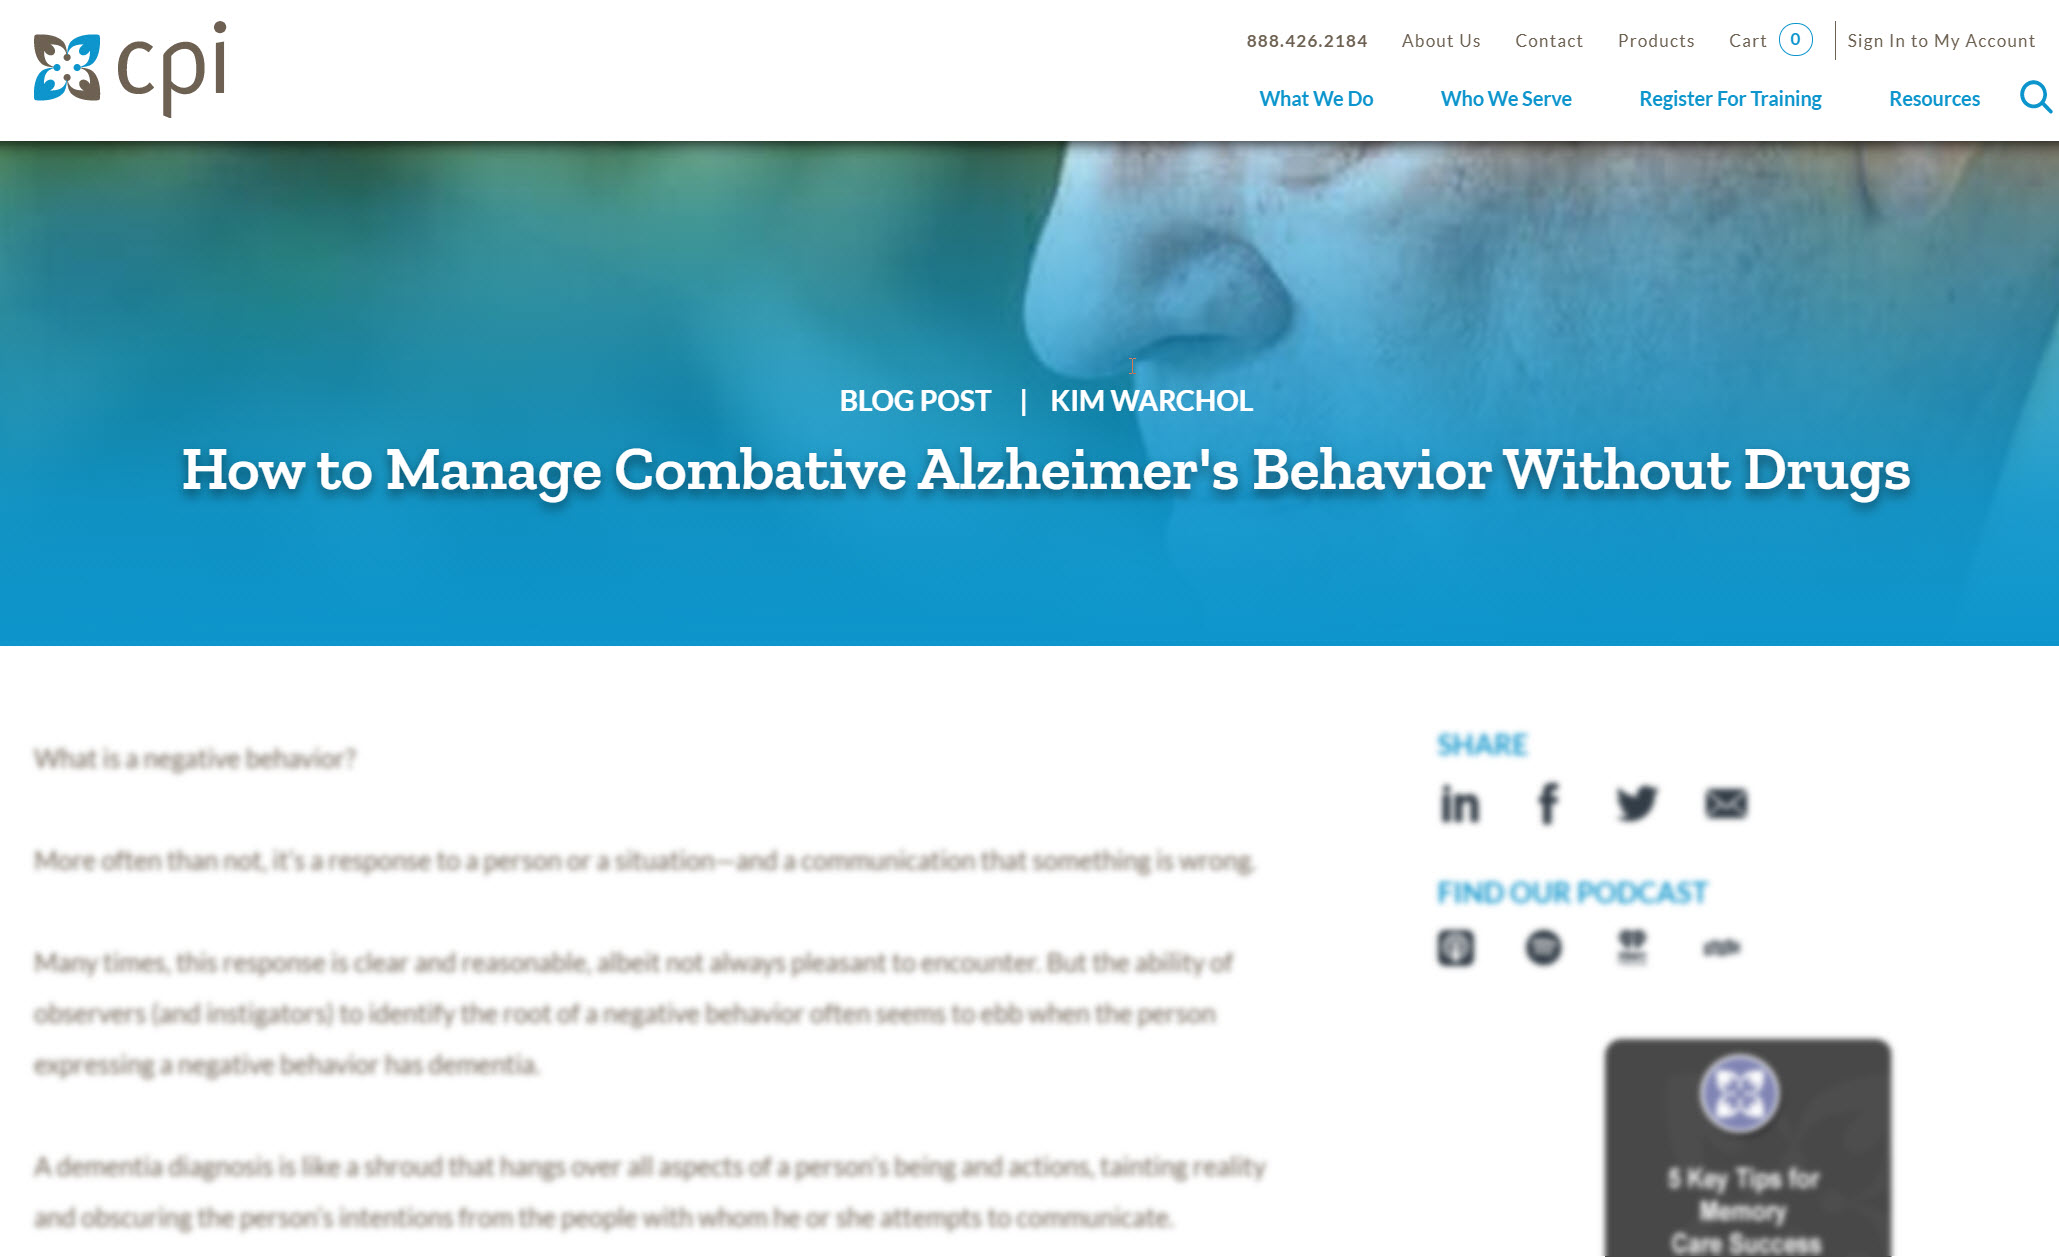 How to Manage Combative Alzheimer's Behavior Without Drugs